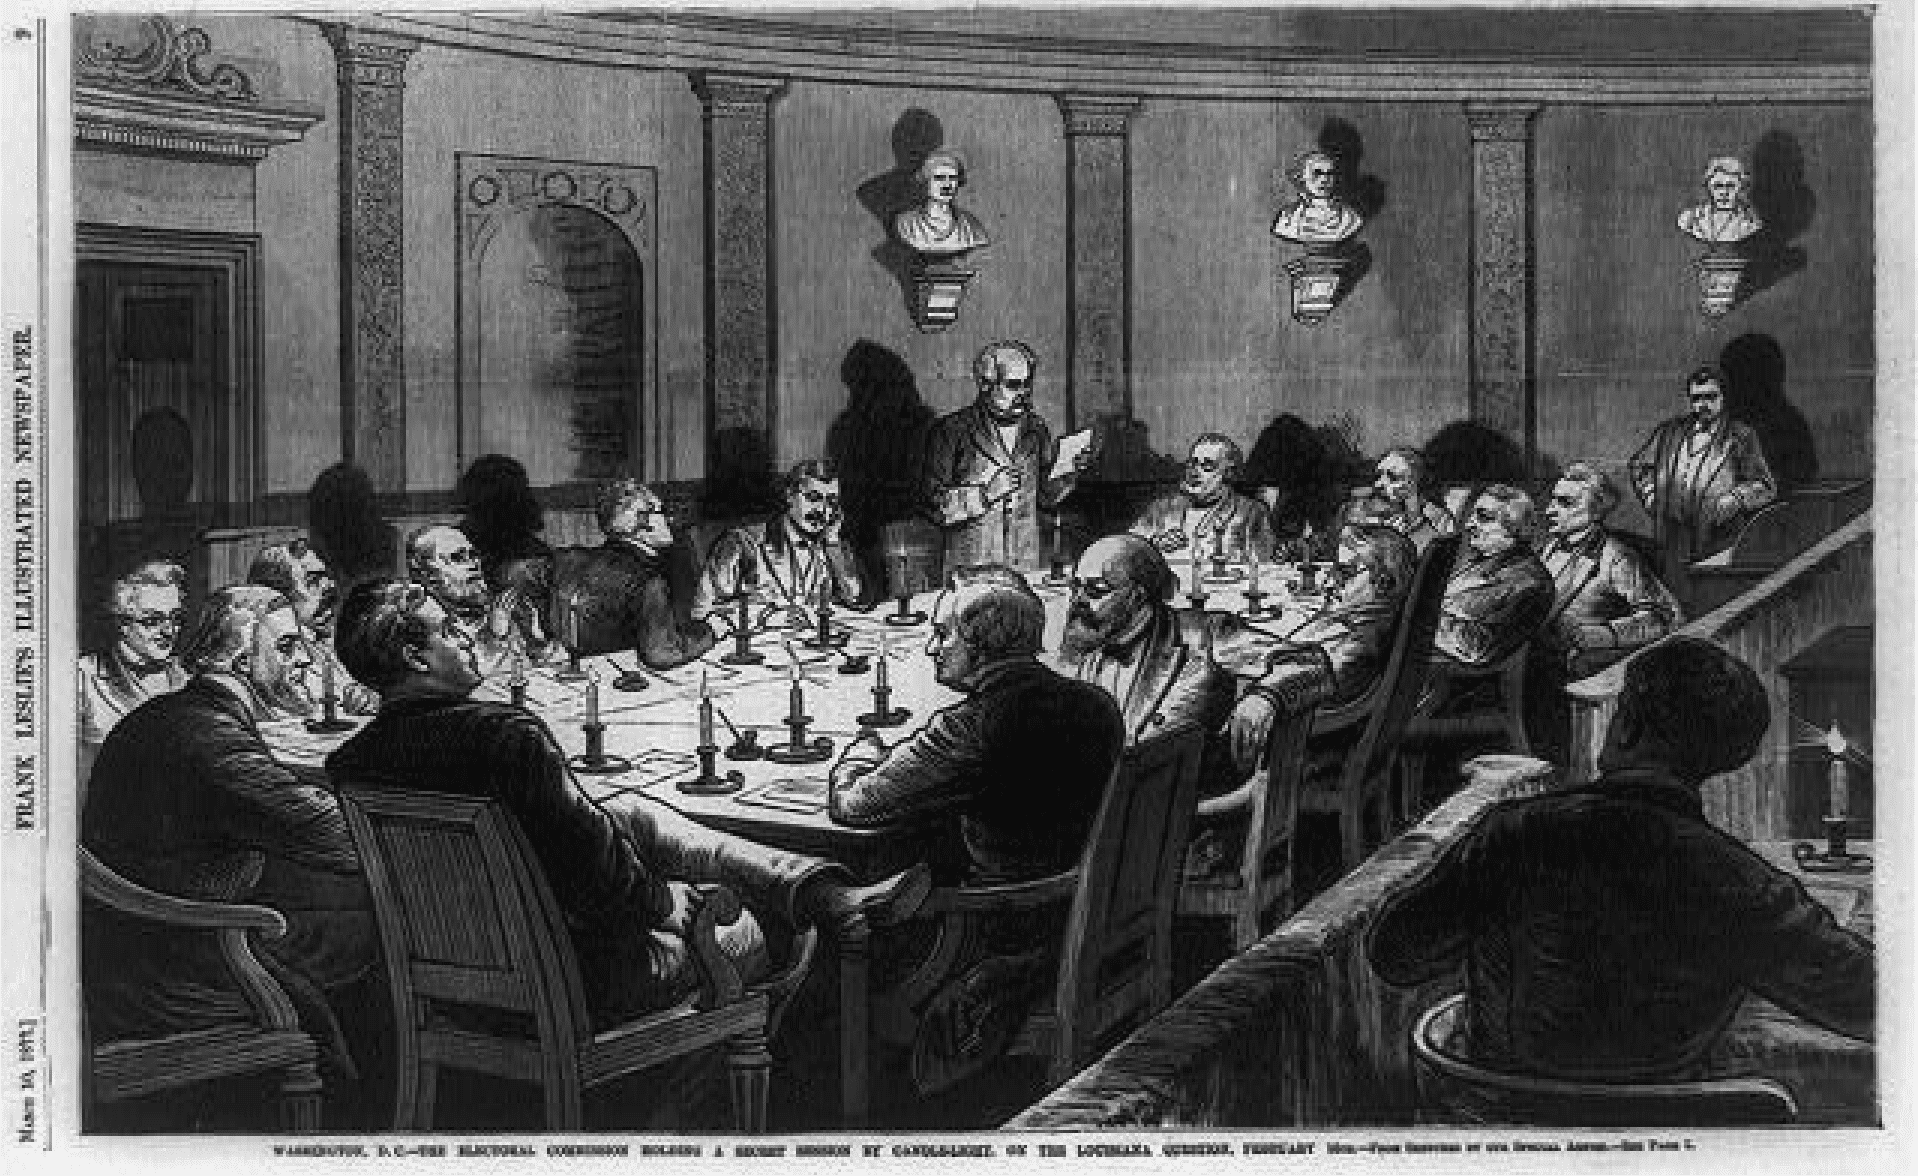 Electoral Commission holds a secret candlelight meeting, Feb. 16, 1877